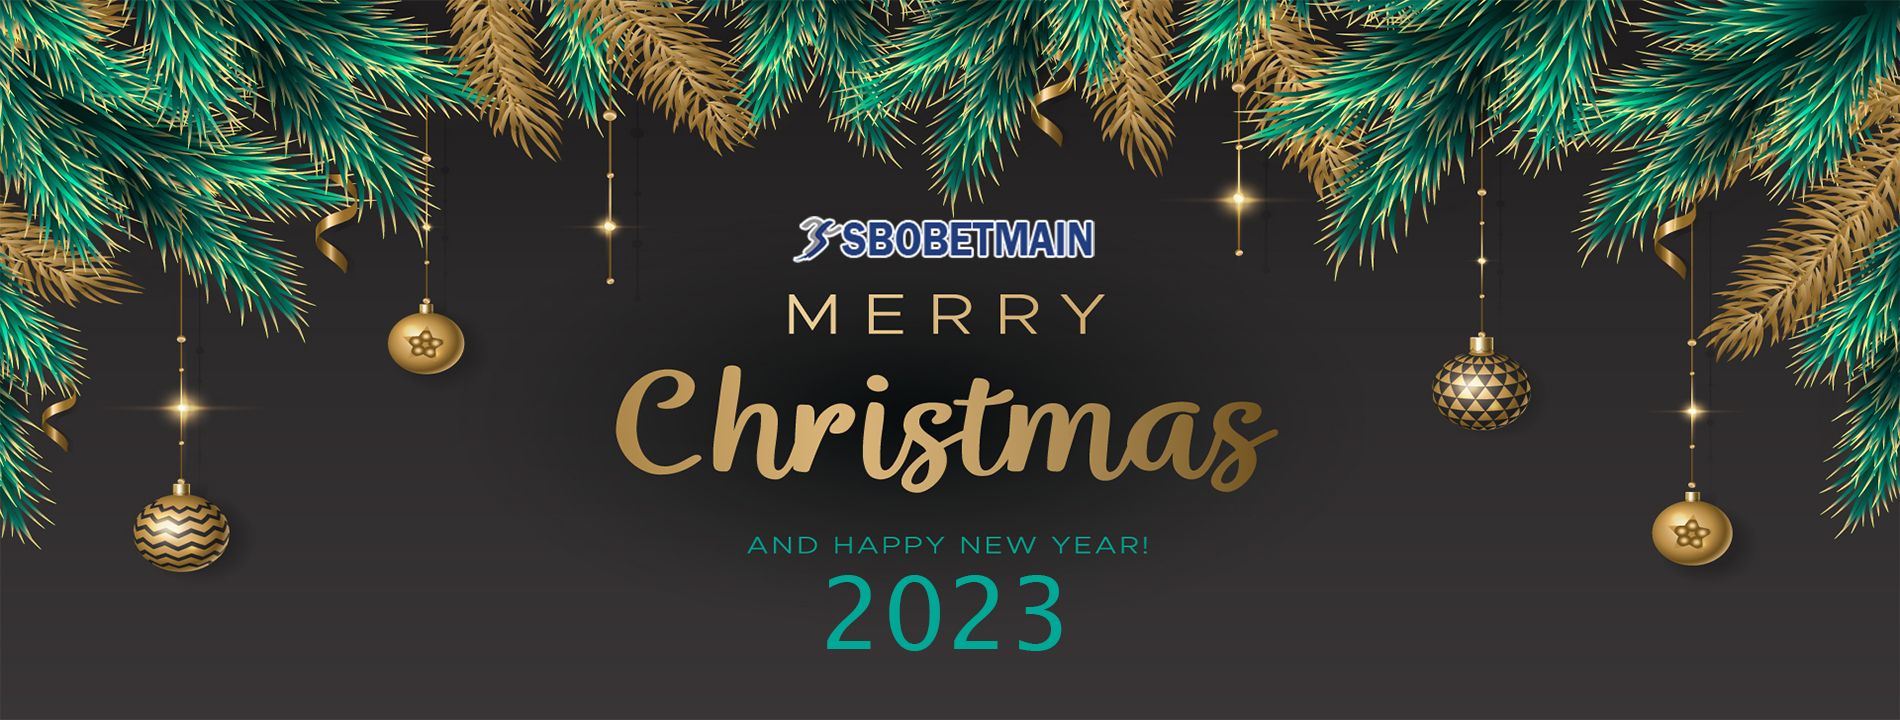 MERRY CHRISTMAS AND HAPPY NEW YEAR 2023